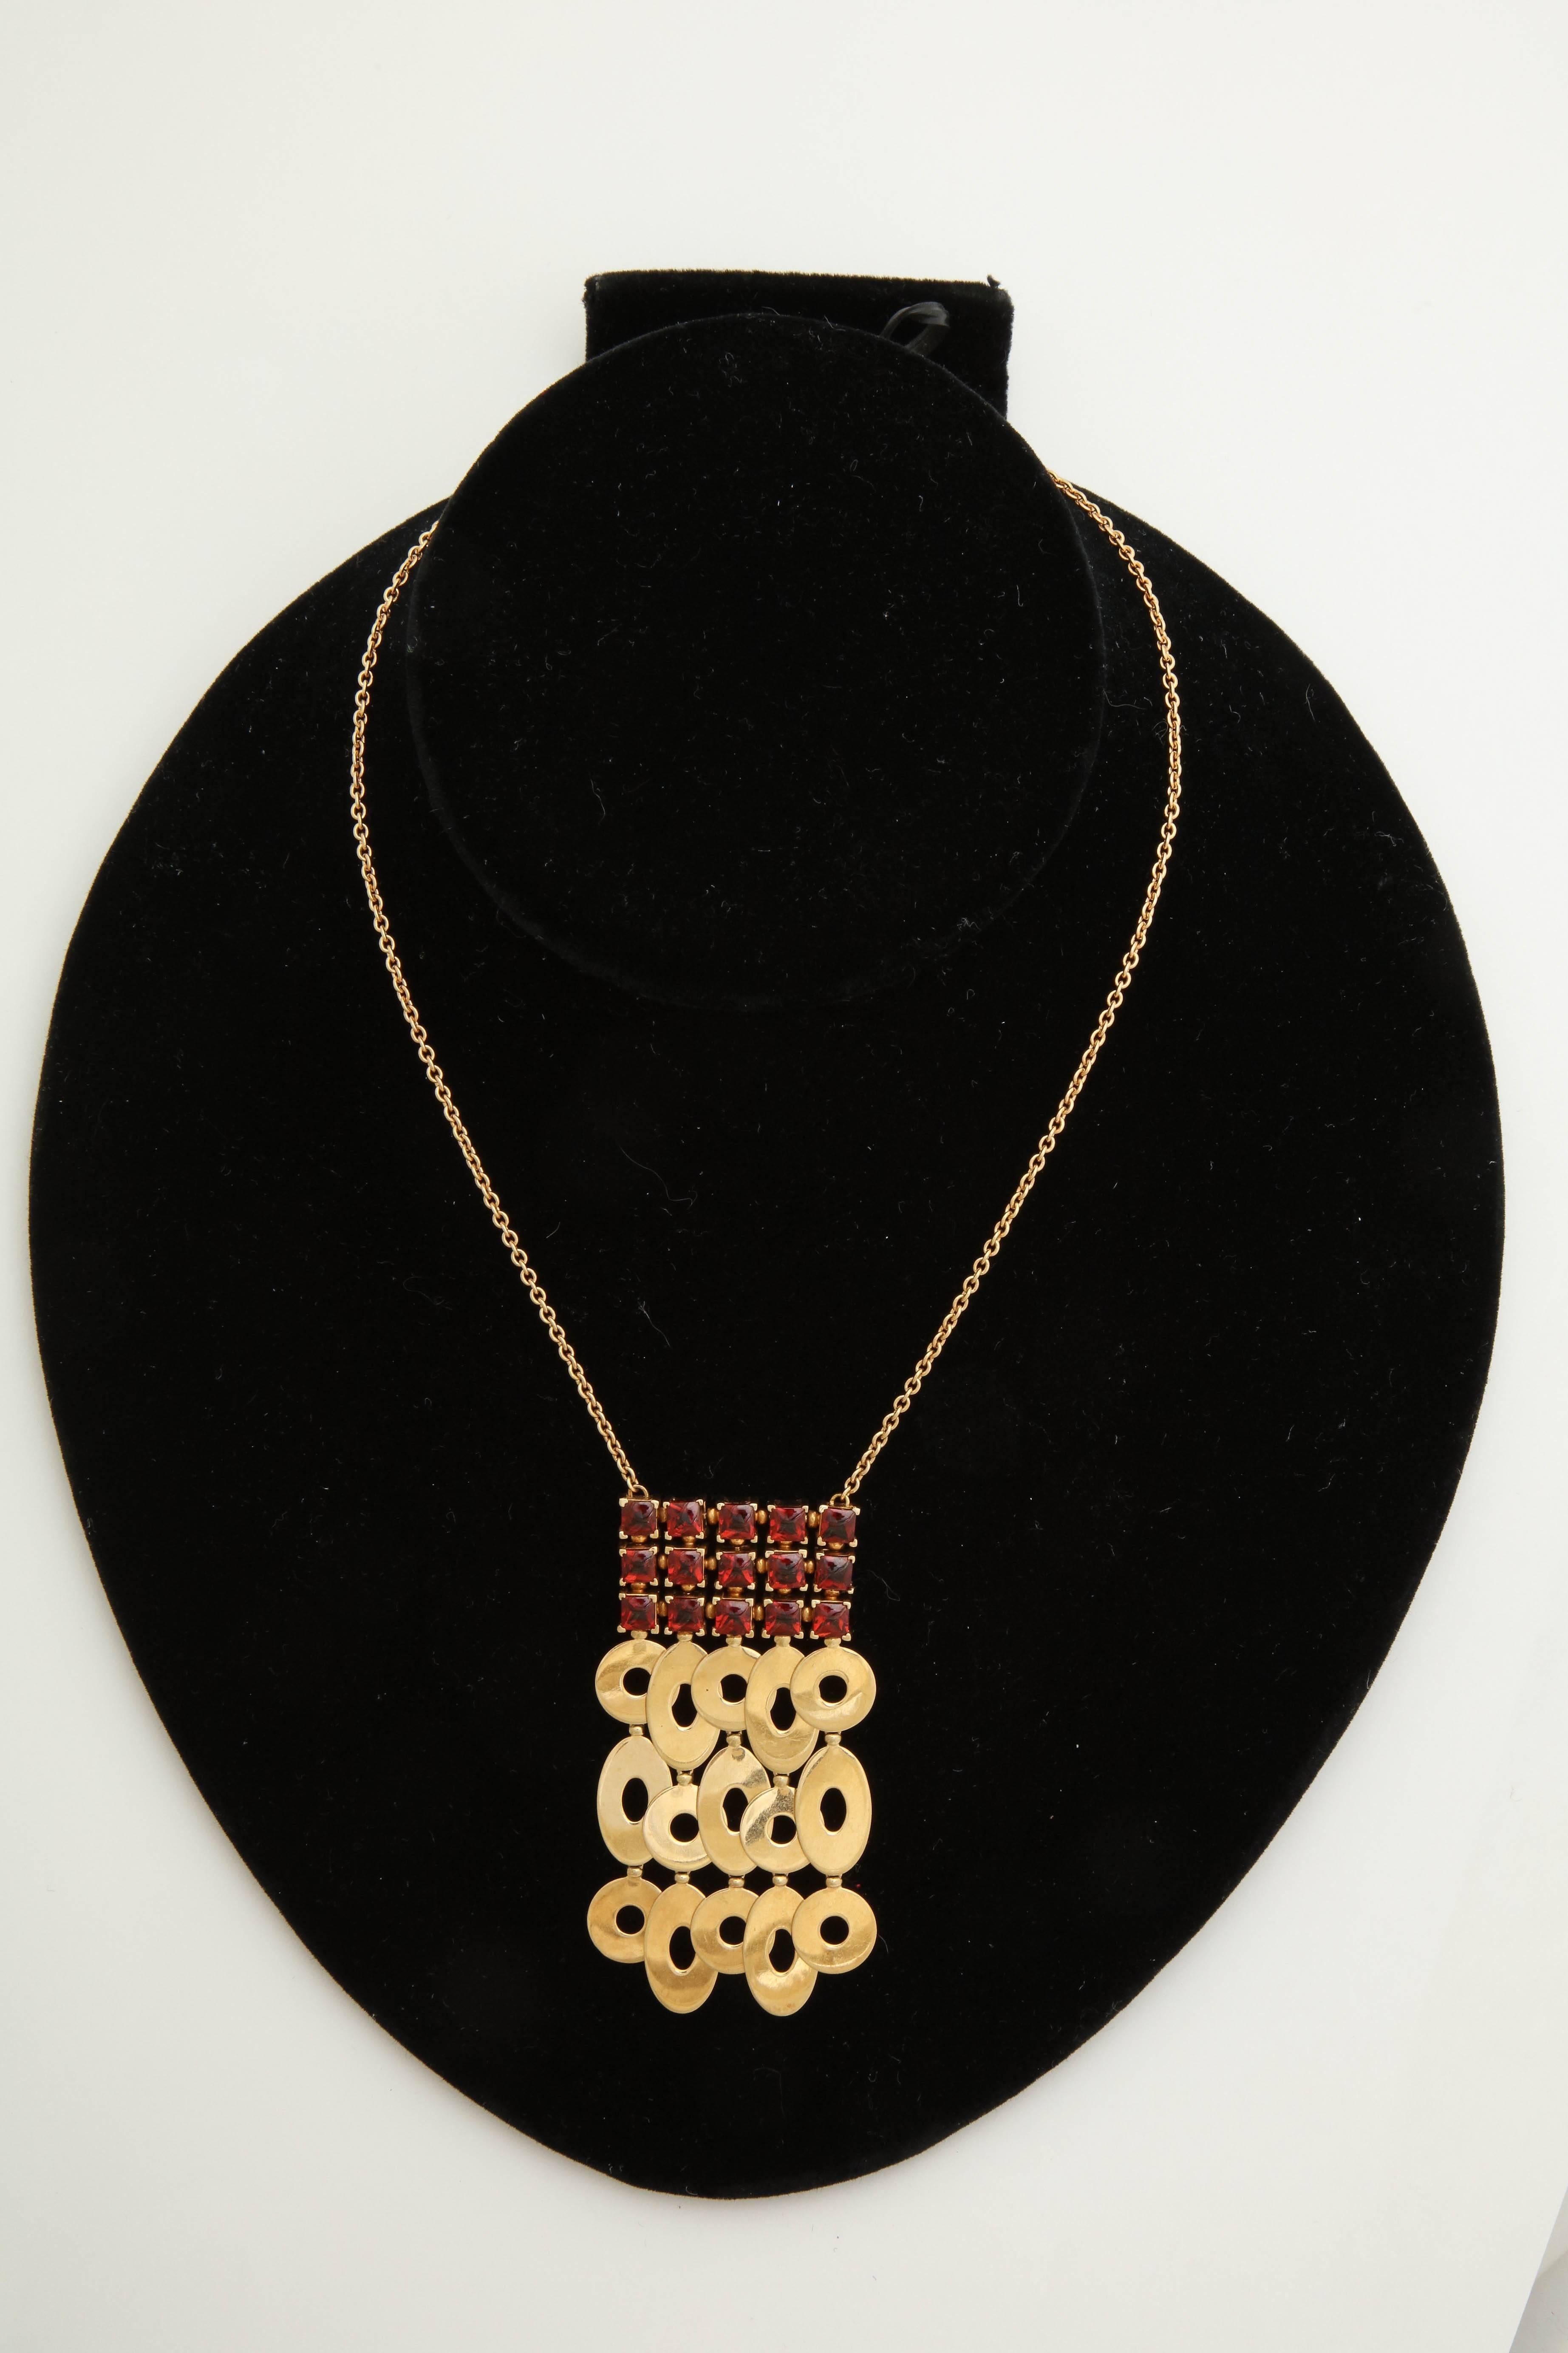 One Ladies Pendant Style Necklace Composed Of 18kt Yellow Gold And Embellished With Fifteen Buff Cut Sugarloaf Cut Prong Set Garnet Stones Weighing approximately 3.0 carats. Necklace Is Further Designed with Fifteen Asymmetrical Open Discs Of Oblong